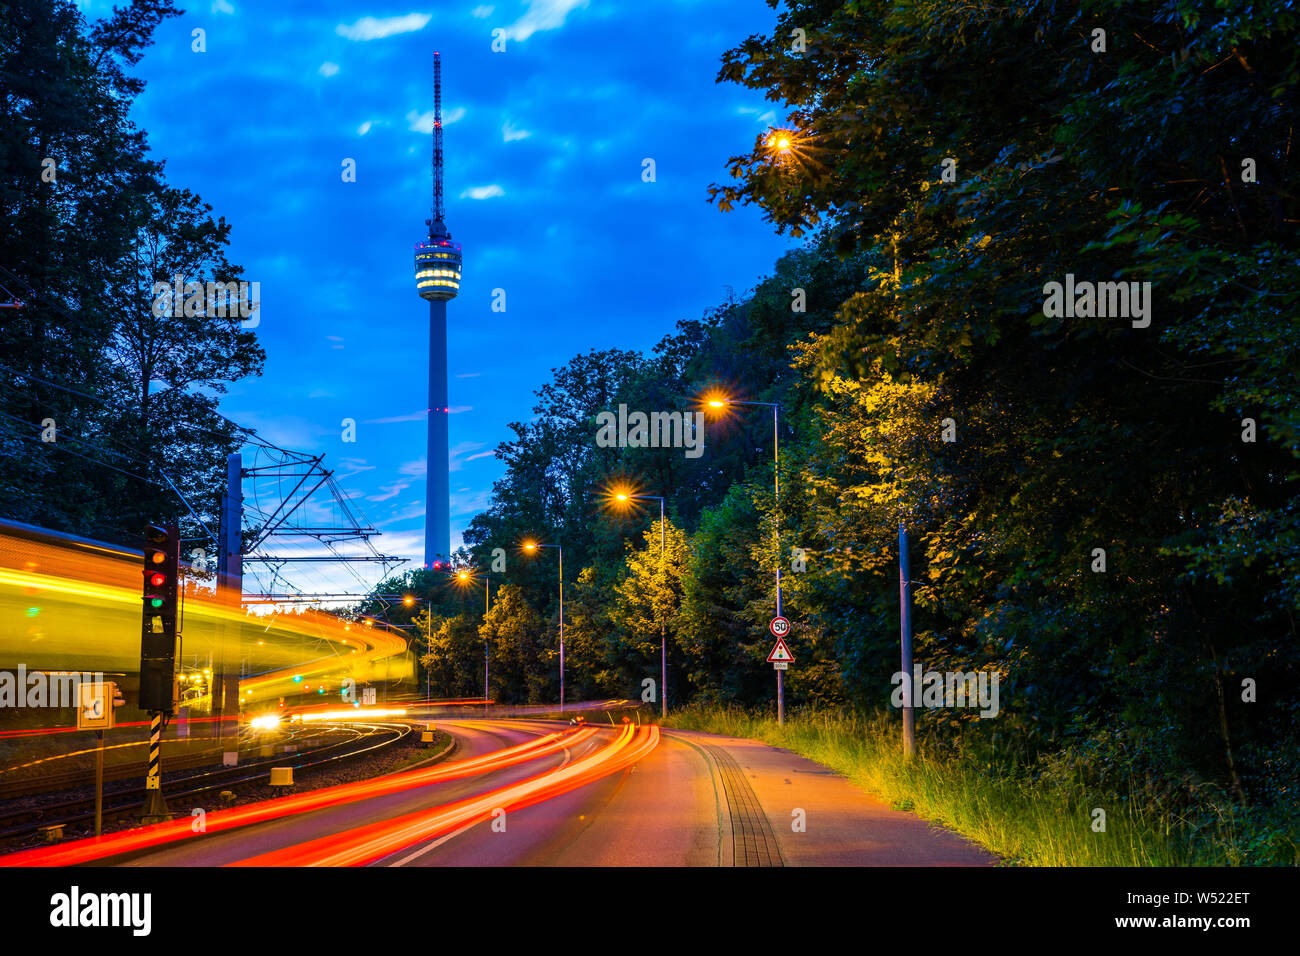 Germany, Lights of illuminated train and traffic passing by street road to television tower of stuttgart city inside green forest nature landscape in Stock Photo